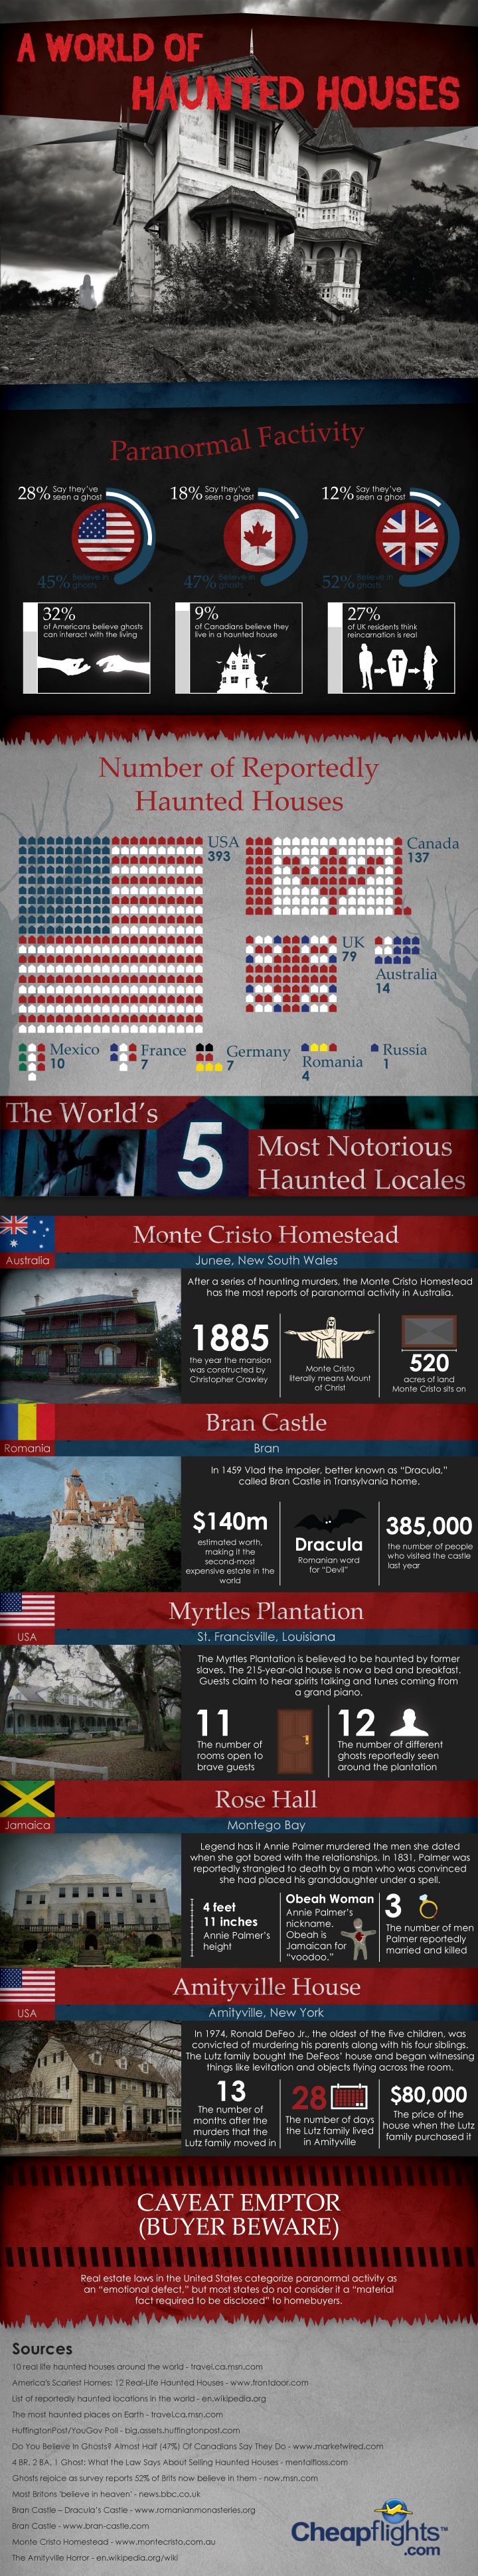 Paranormal Fact-ivity: A World Of Haunted Houses